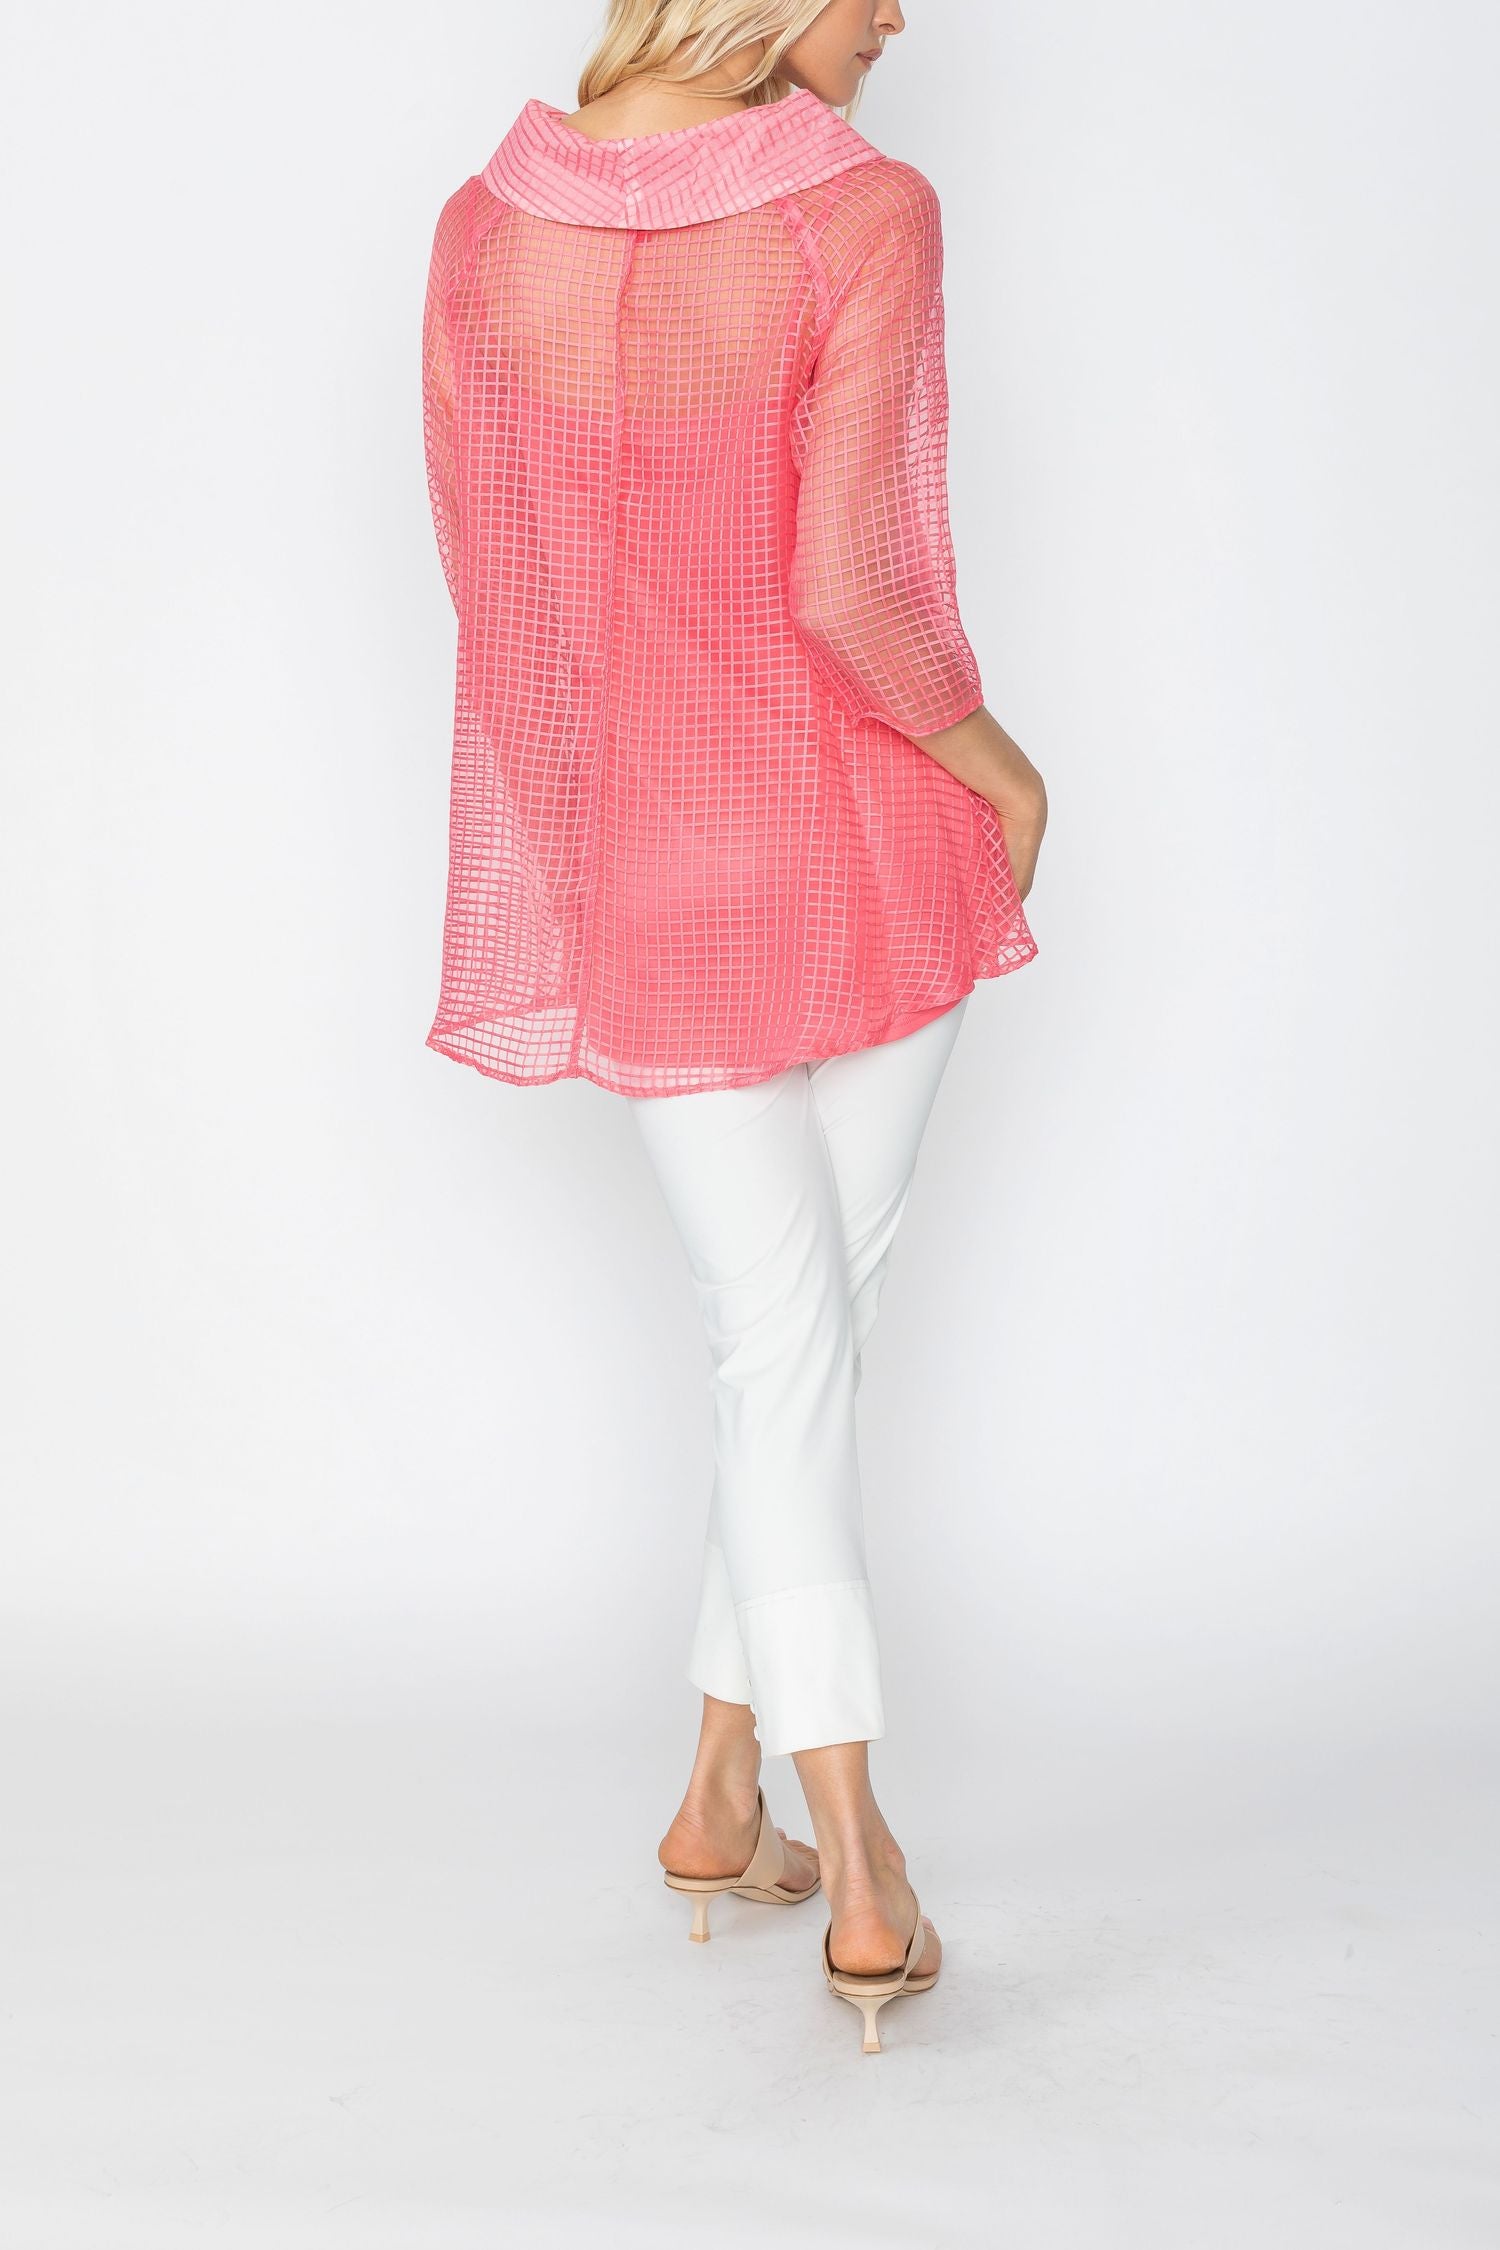 Cowl Neck 3/4 Sleeve See-Through Fabric Top